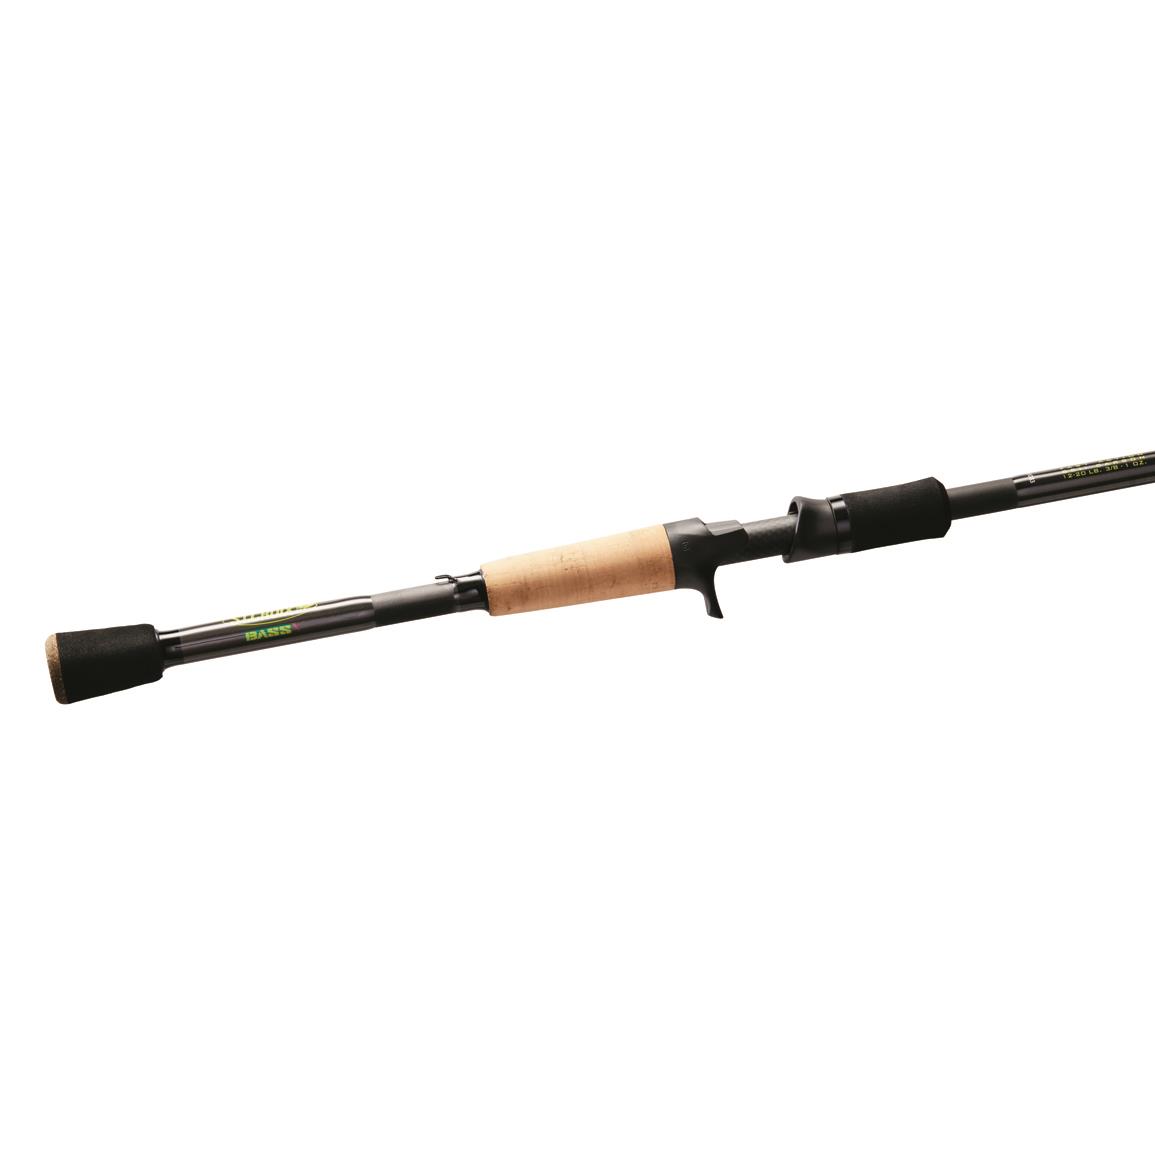 St. Croix Bass X Casting Rod, 7'11" Length, Heavy Power, Moderately Fast Action